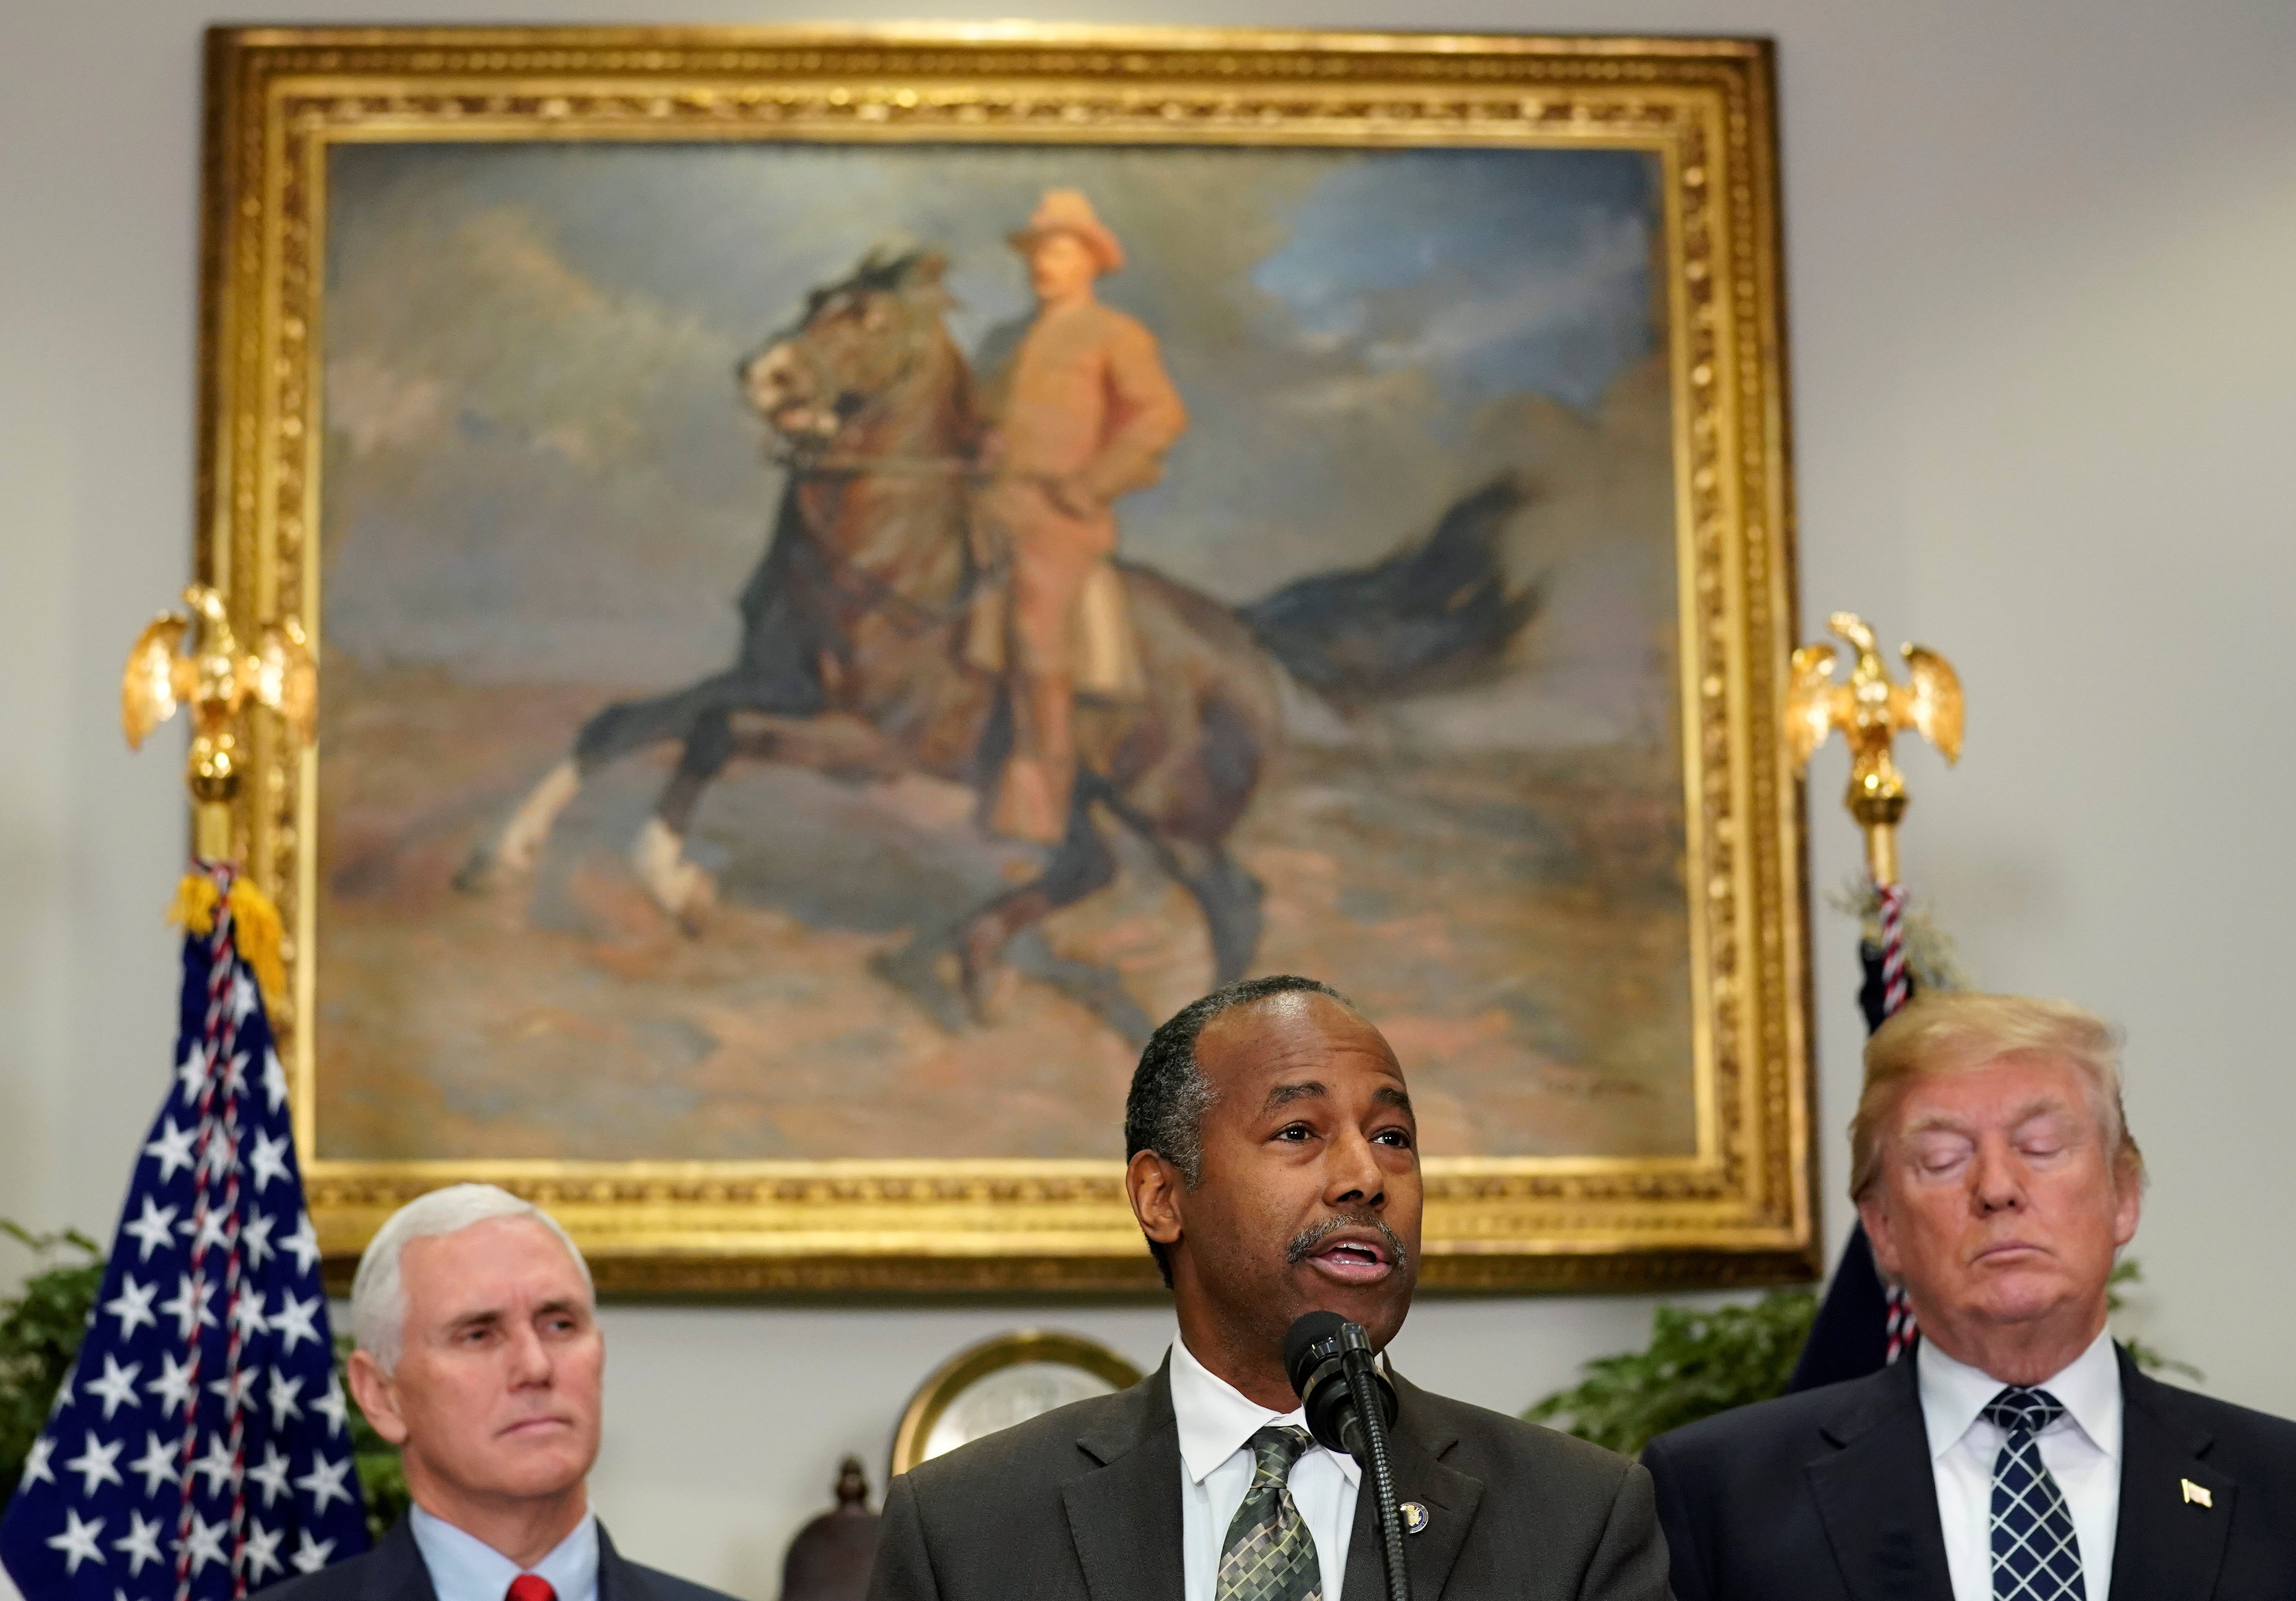 U.S. Secretary of Housing and Urban Development Ben Carson speaks as U.S. Vice President Mike Pence and U.S. President Donald Trump watch during an event to honor Martin Luther King Jr. in the Roosevelt Room of the White House in Washington, U.S., January 12, 2018. REUTERS/Joshua Roberts - RC15FB189000